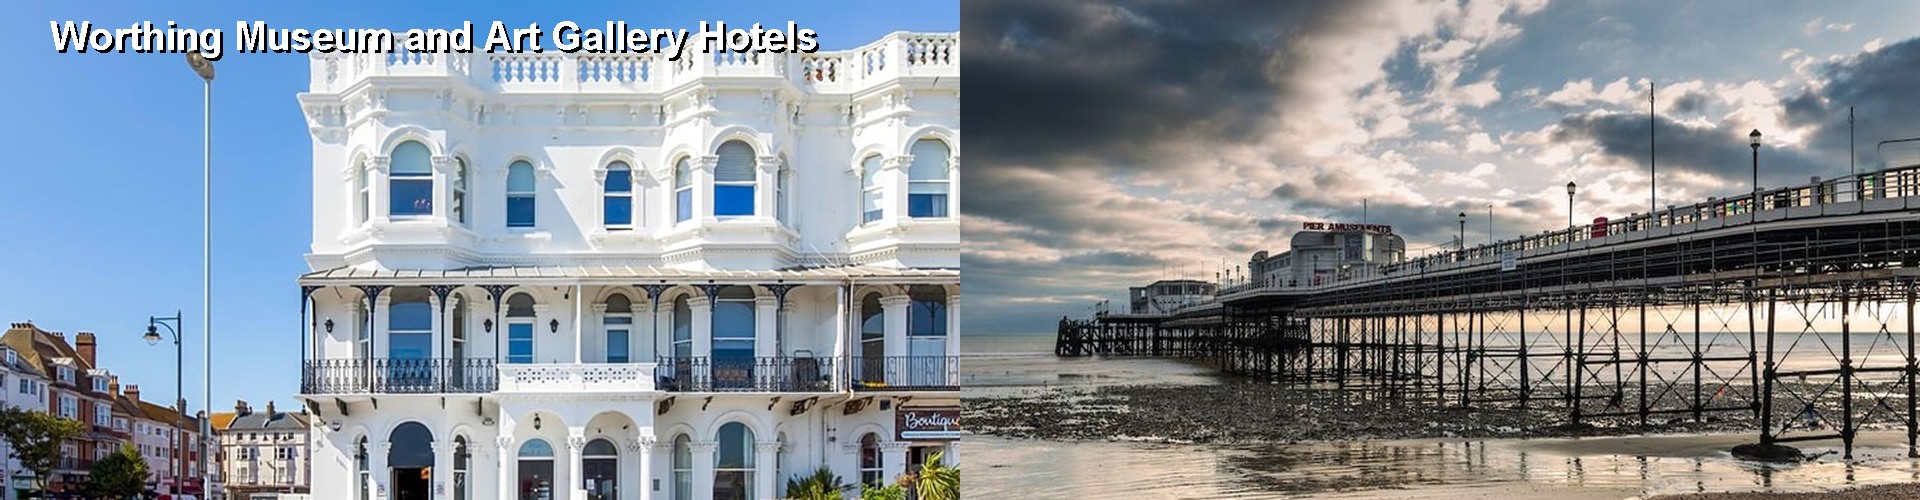 5 Best Hotels near Worthing Museum and Art Gallery